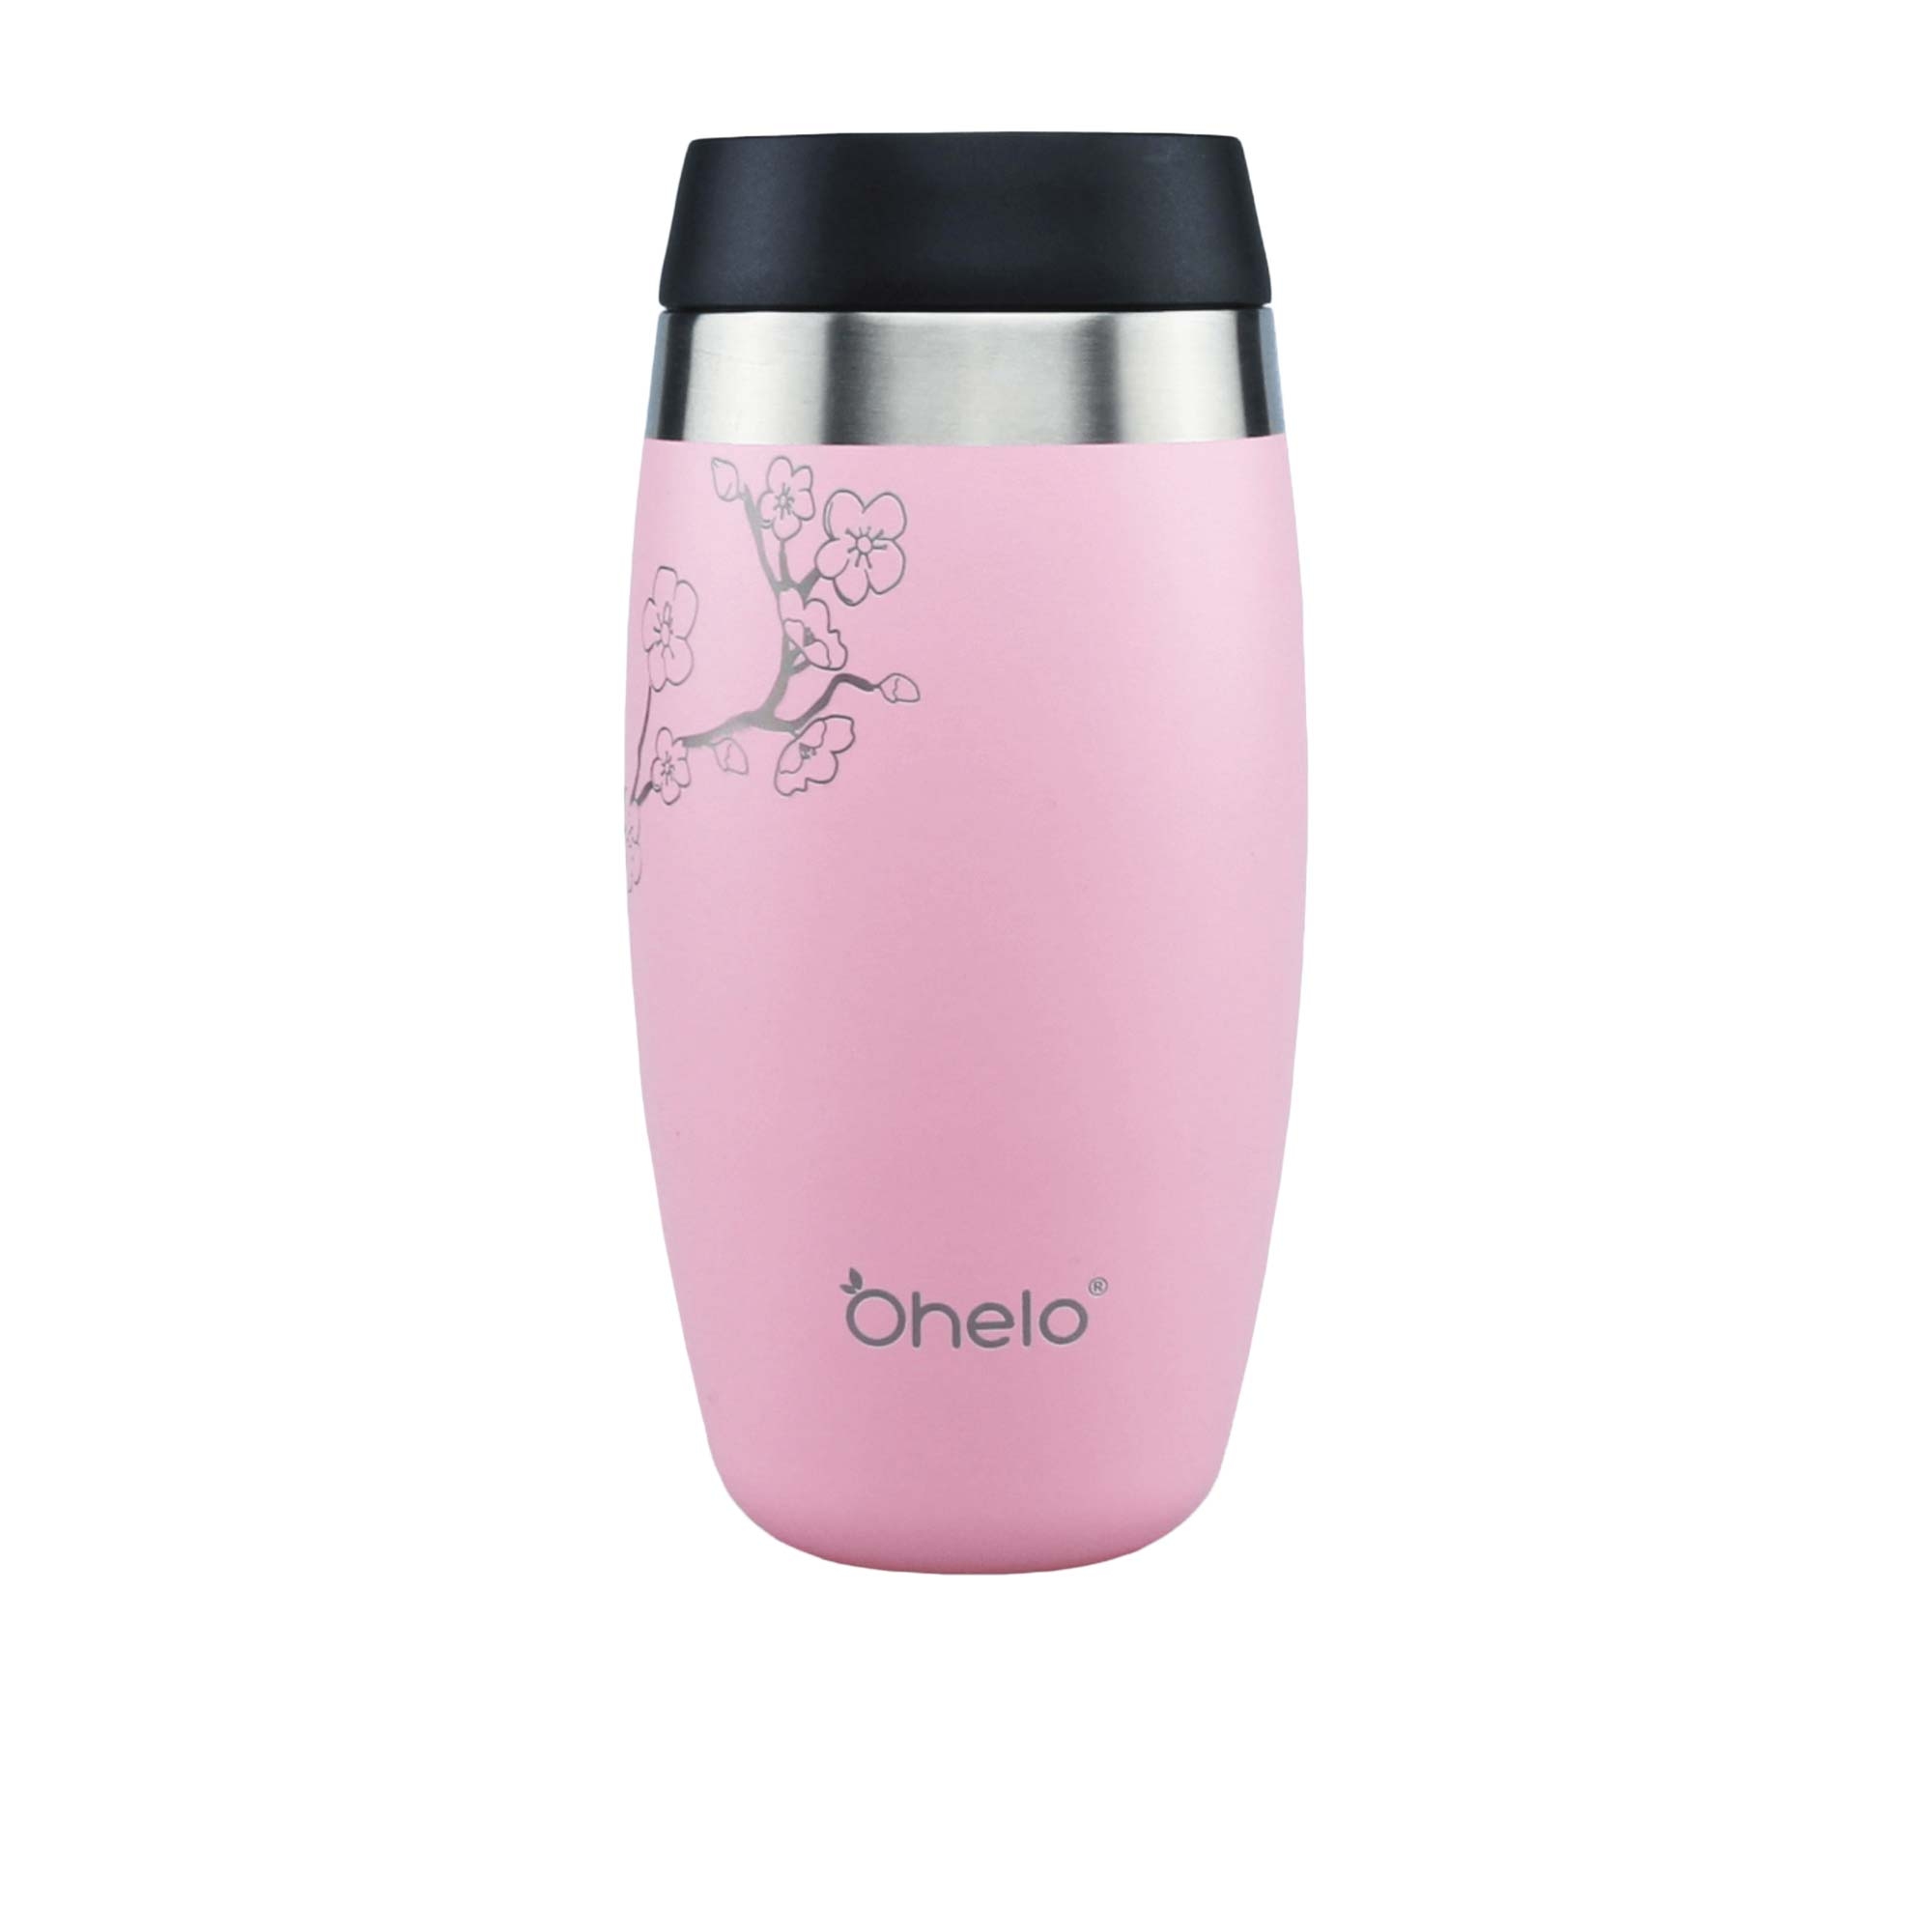 Ohelo Insulated Tumbler 400ml Pink Image 1